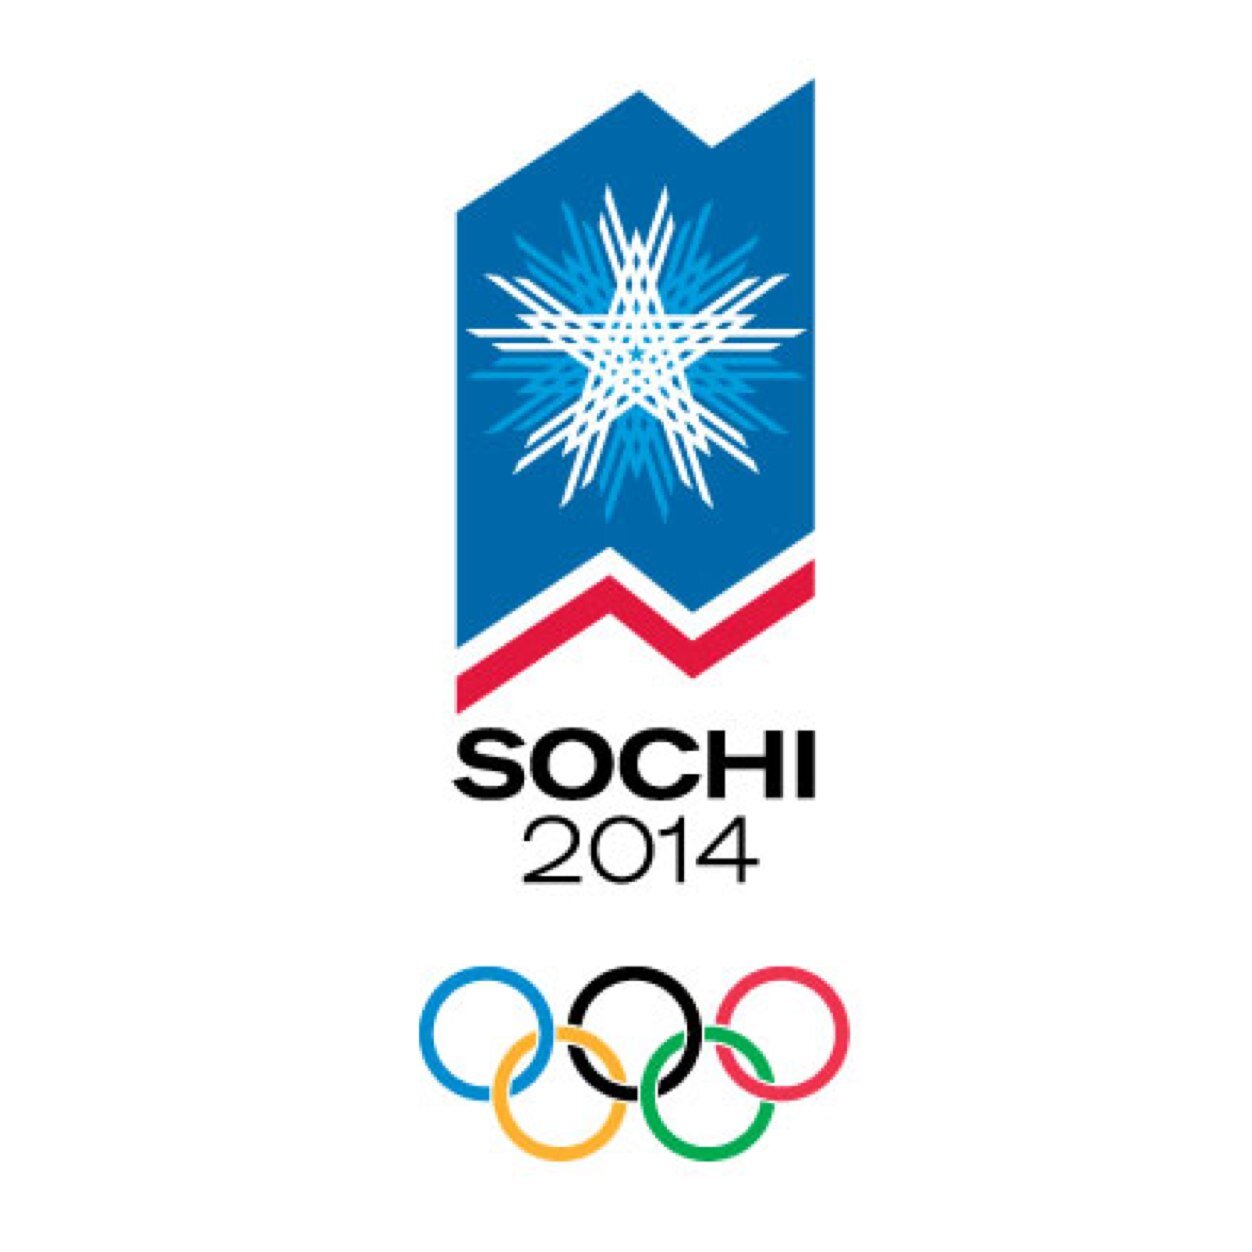 The problems of the 2014 Sochi Olympics
Not affiliated with the 2014 Winter Olympics